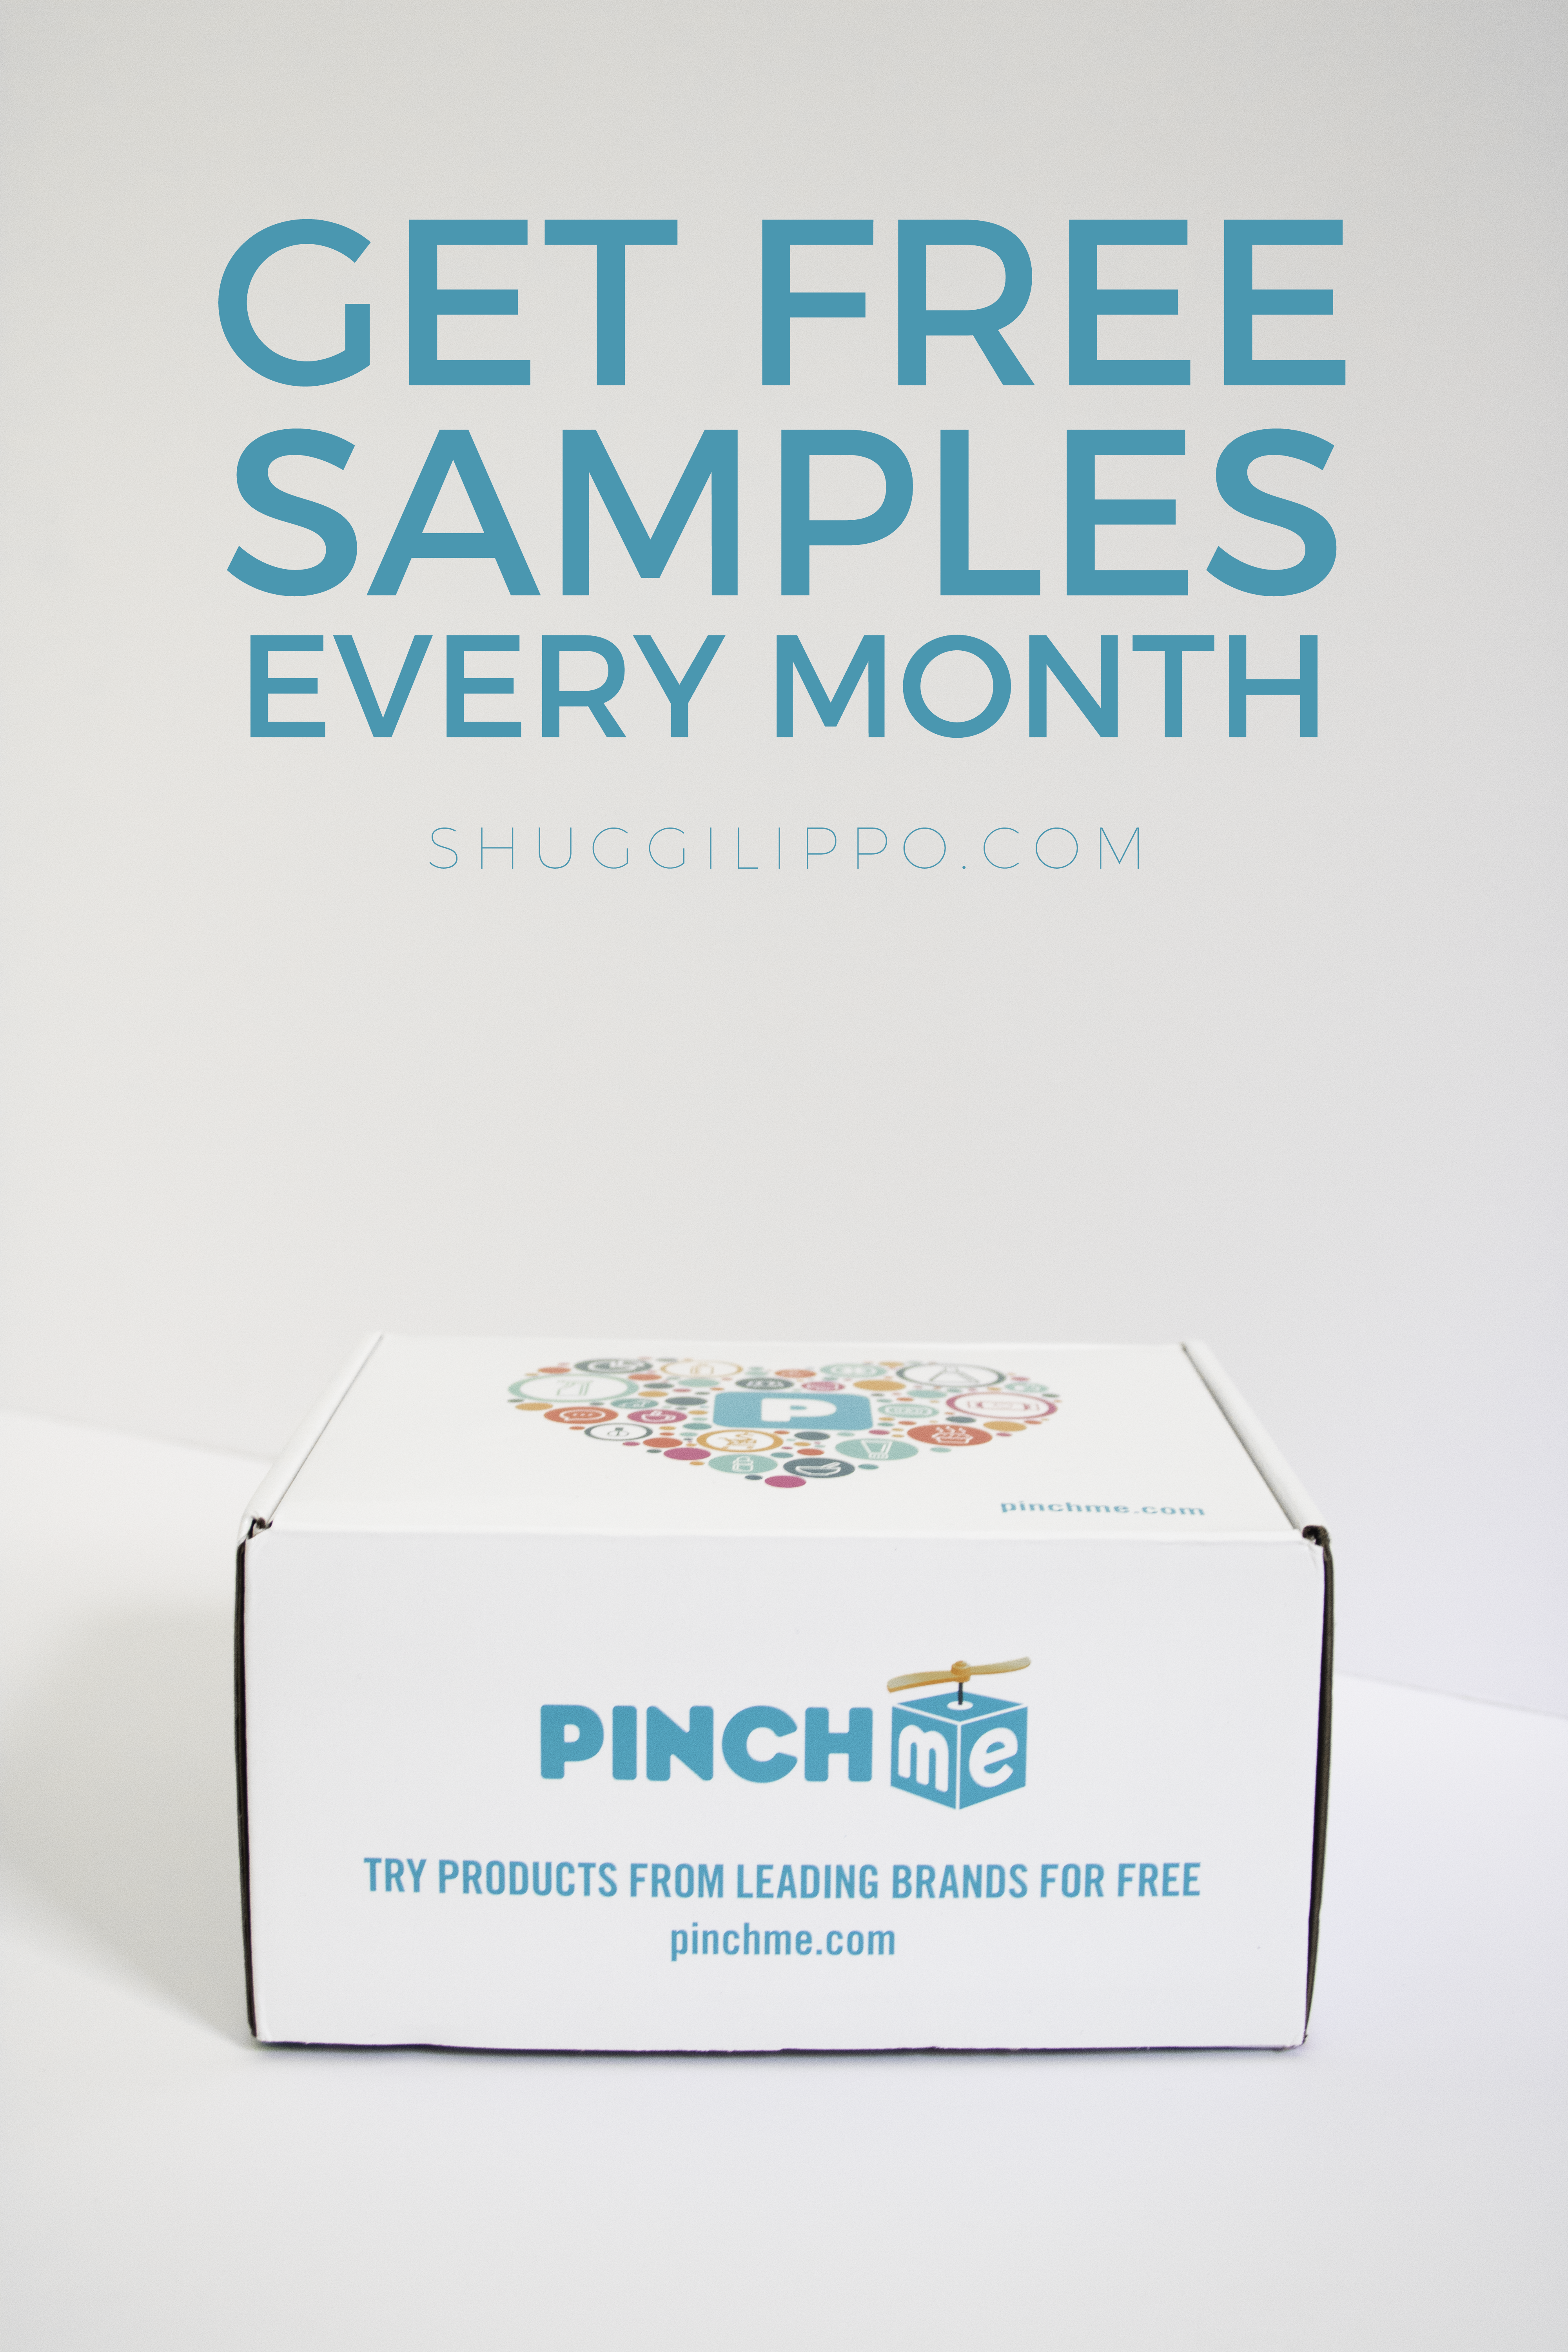 I love getting free stuff! Who doesn't? I recently became and ambassador for PINCHme where you can get FREE samples of products from major brands. 100% free. No credit card required. Super dope.